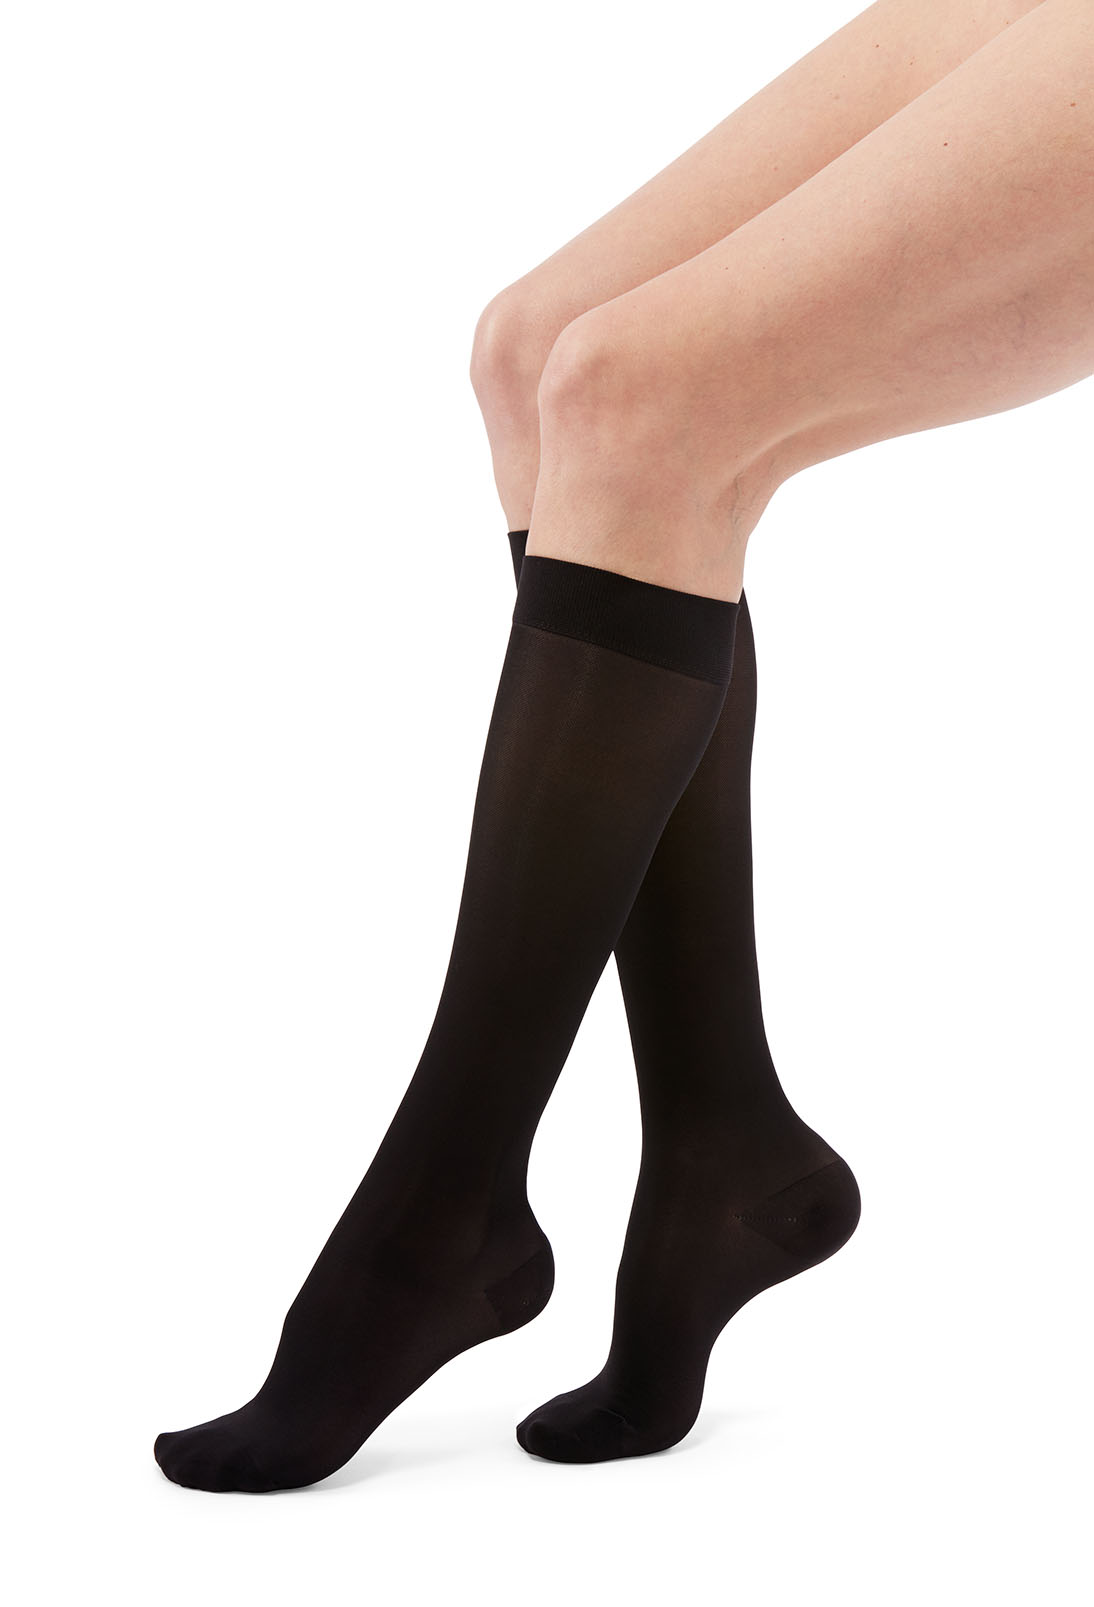 https://ph.services/wp-content/uploads/2019/03/duomed_transparent_calf_black-1.jpg